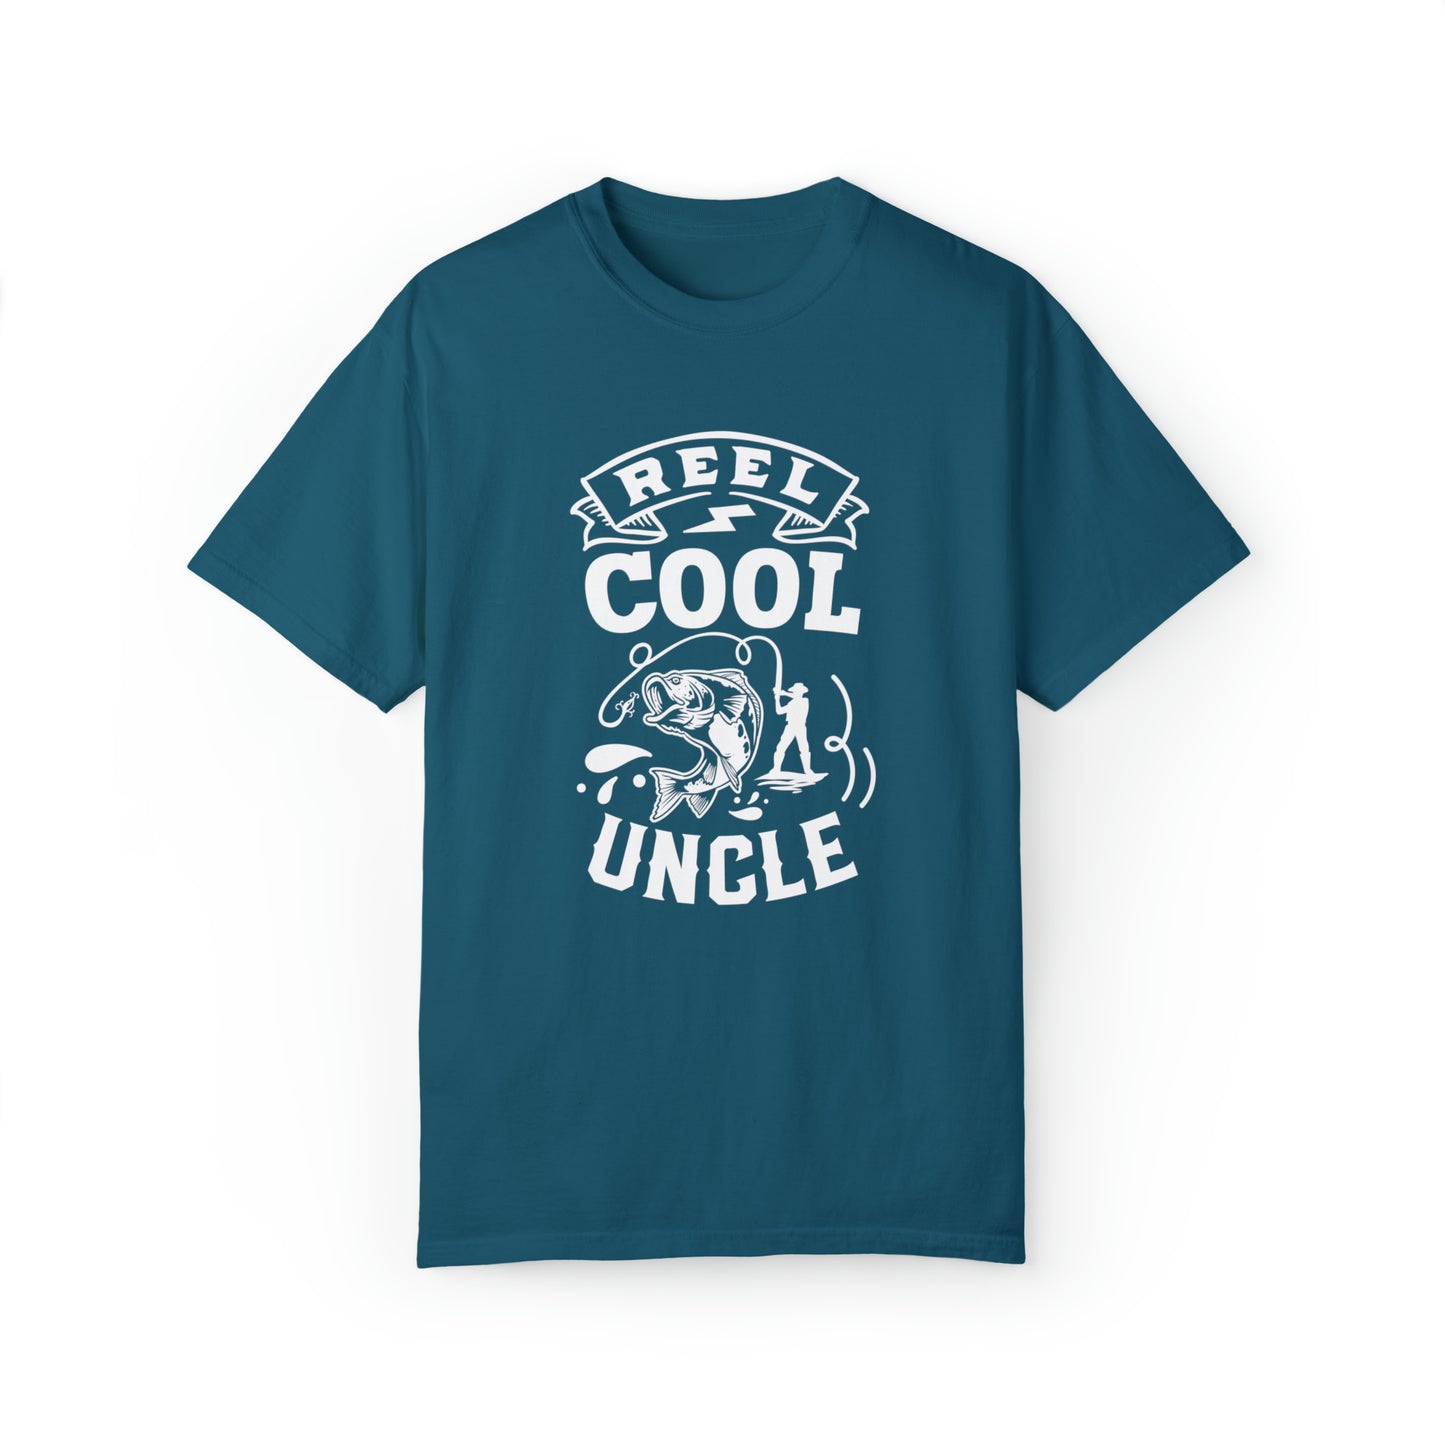 Reel Cool Uncle: Embrace Style and Fun with This T-Shirt!